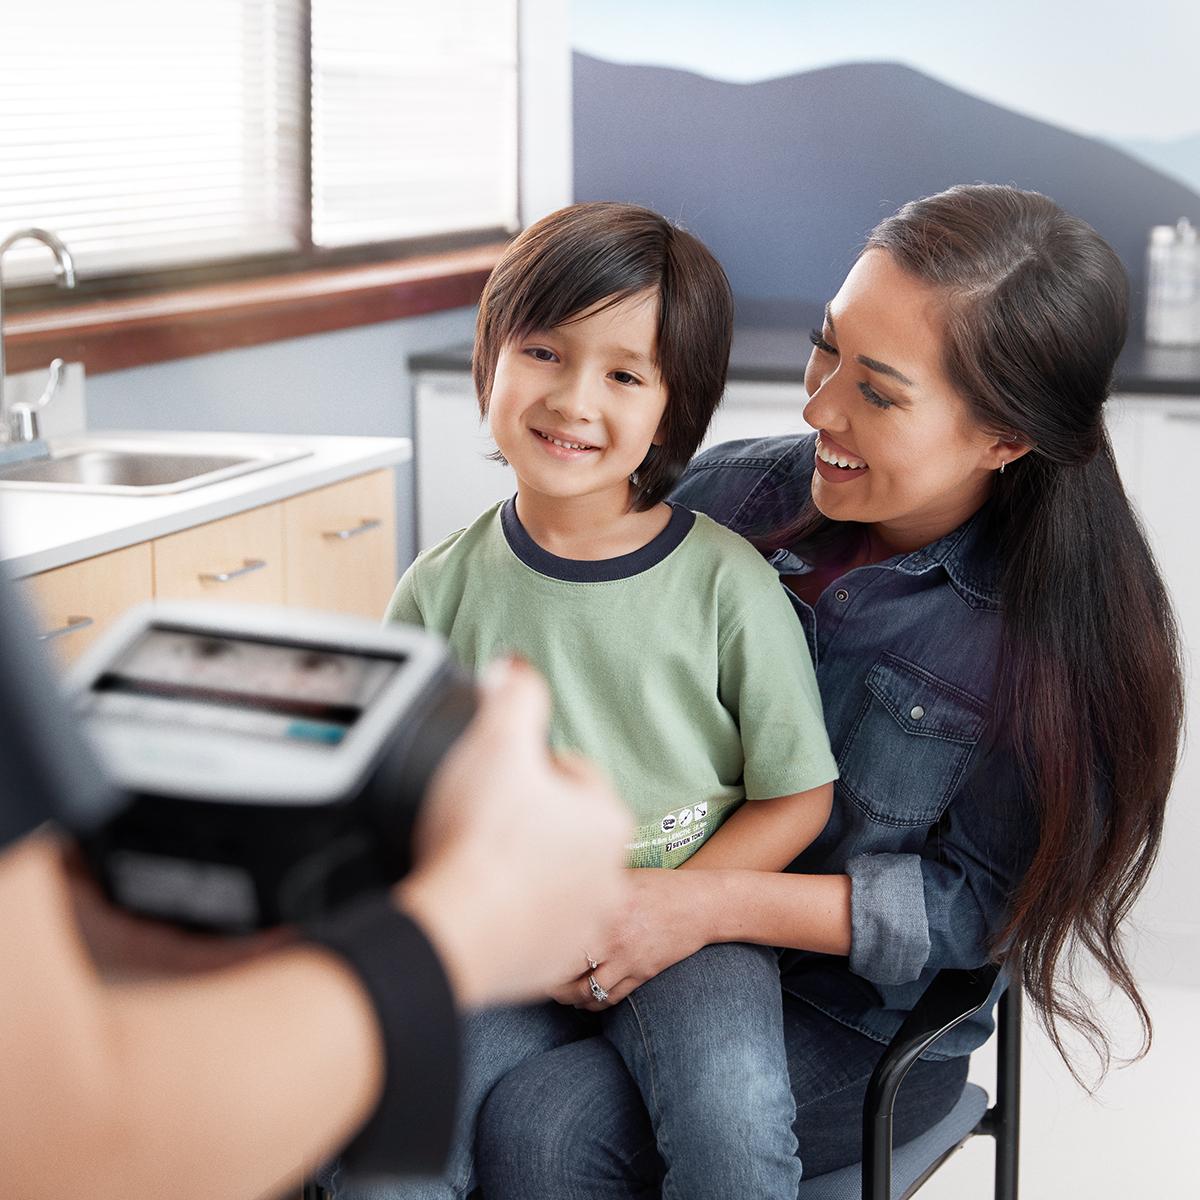 Welch Allyn Spot Vision Screener that quickly detects amblyopia vision issues in pediatric patients being held by clinician (partially seen in foreground), and young patient and mother, seated, in mid-ground